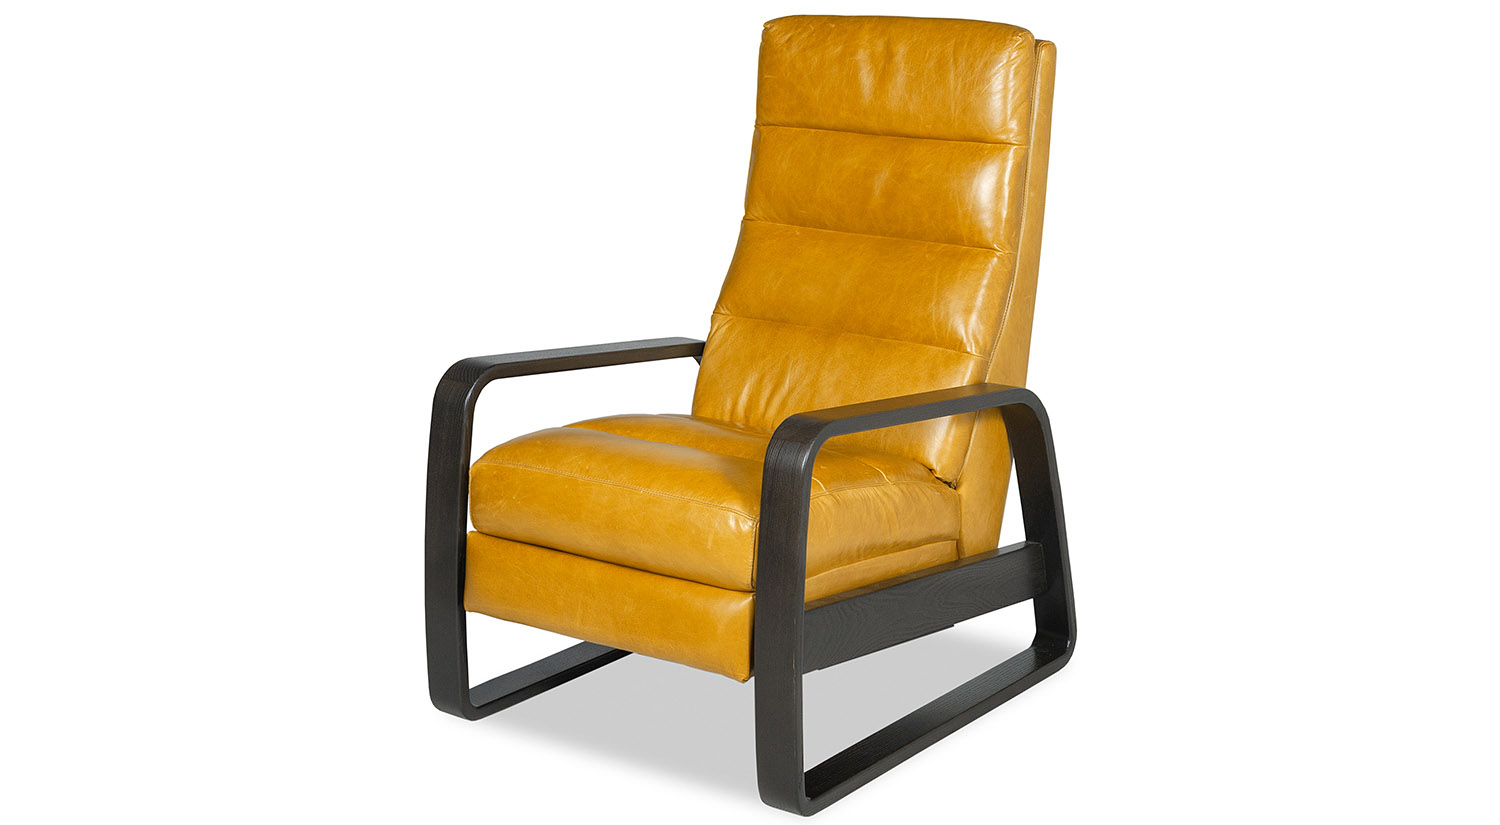 Circle Furniture Elton Recliner, American Leather Recliner Chairs